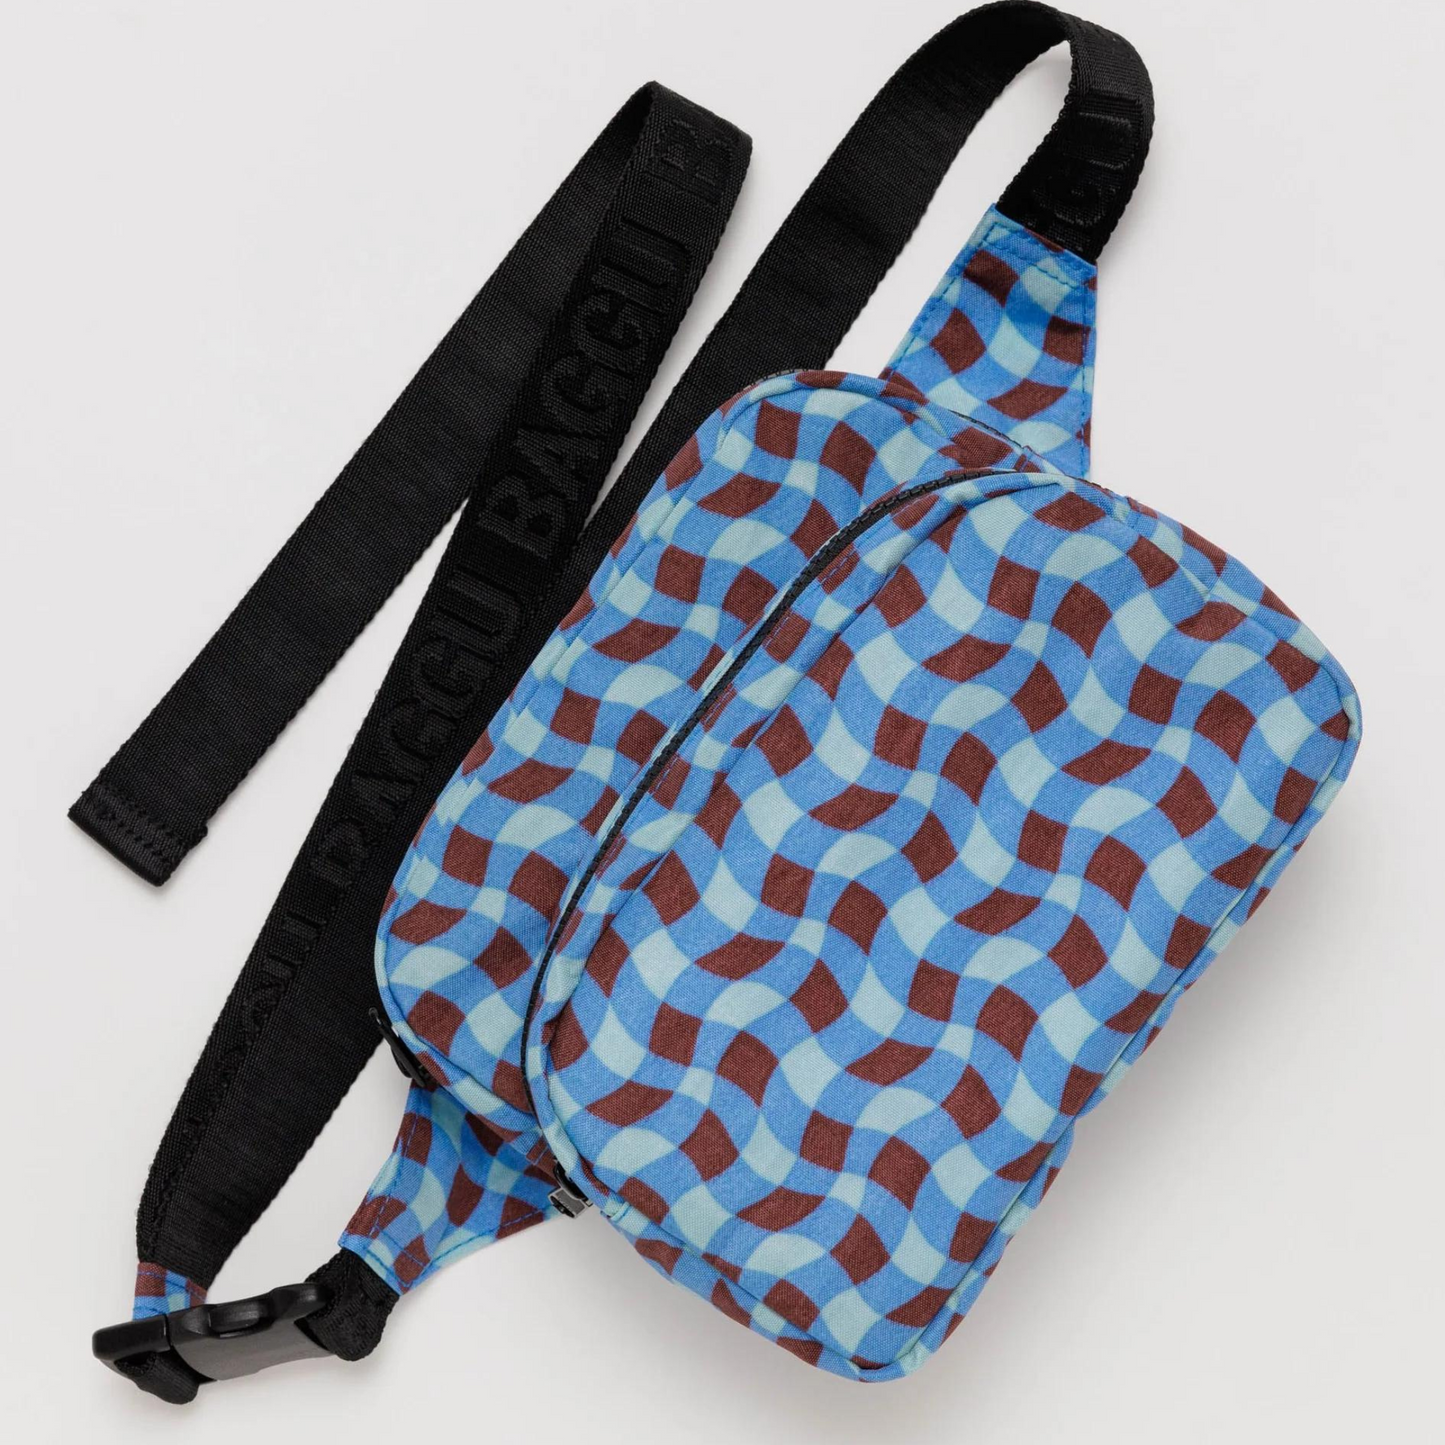 Fanny Pack Wavy Gingham Blue